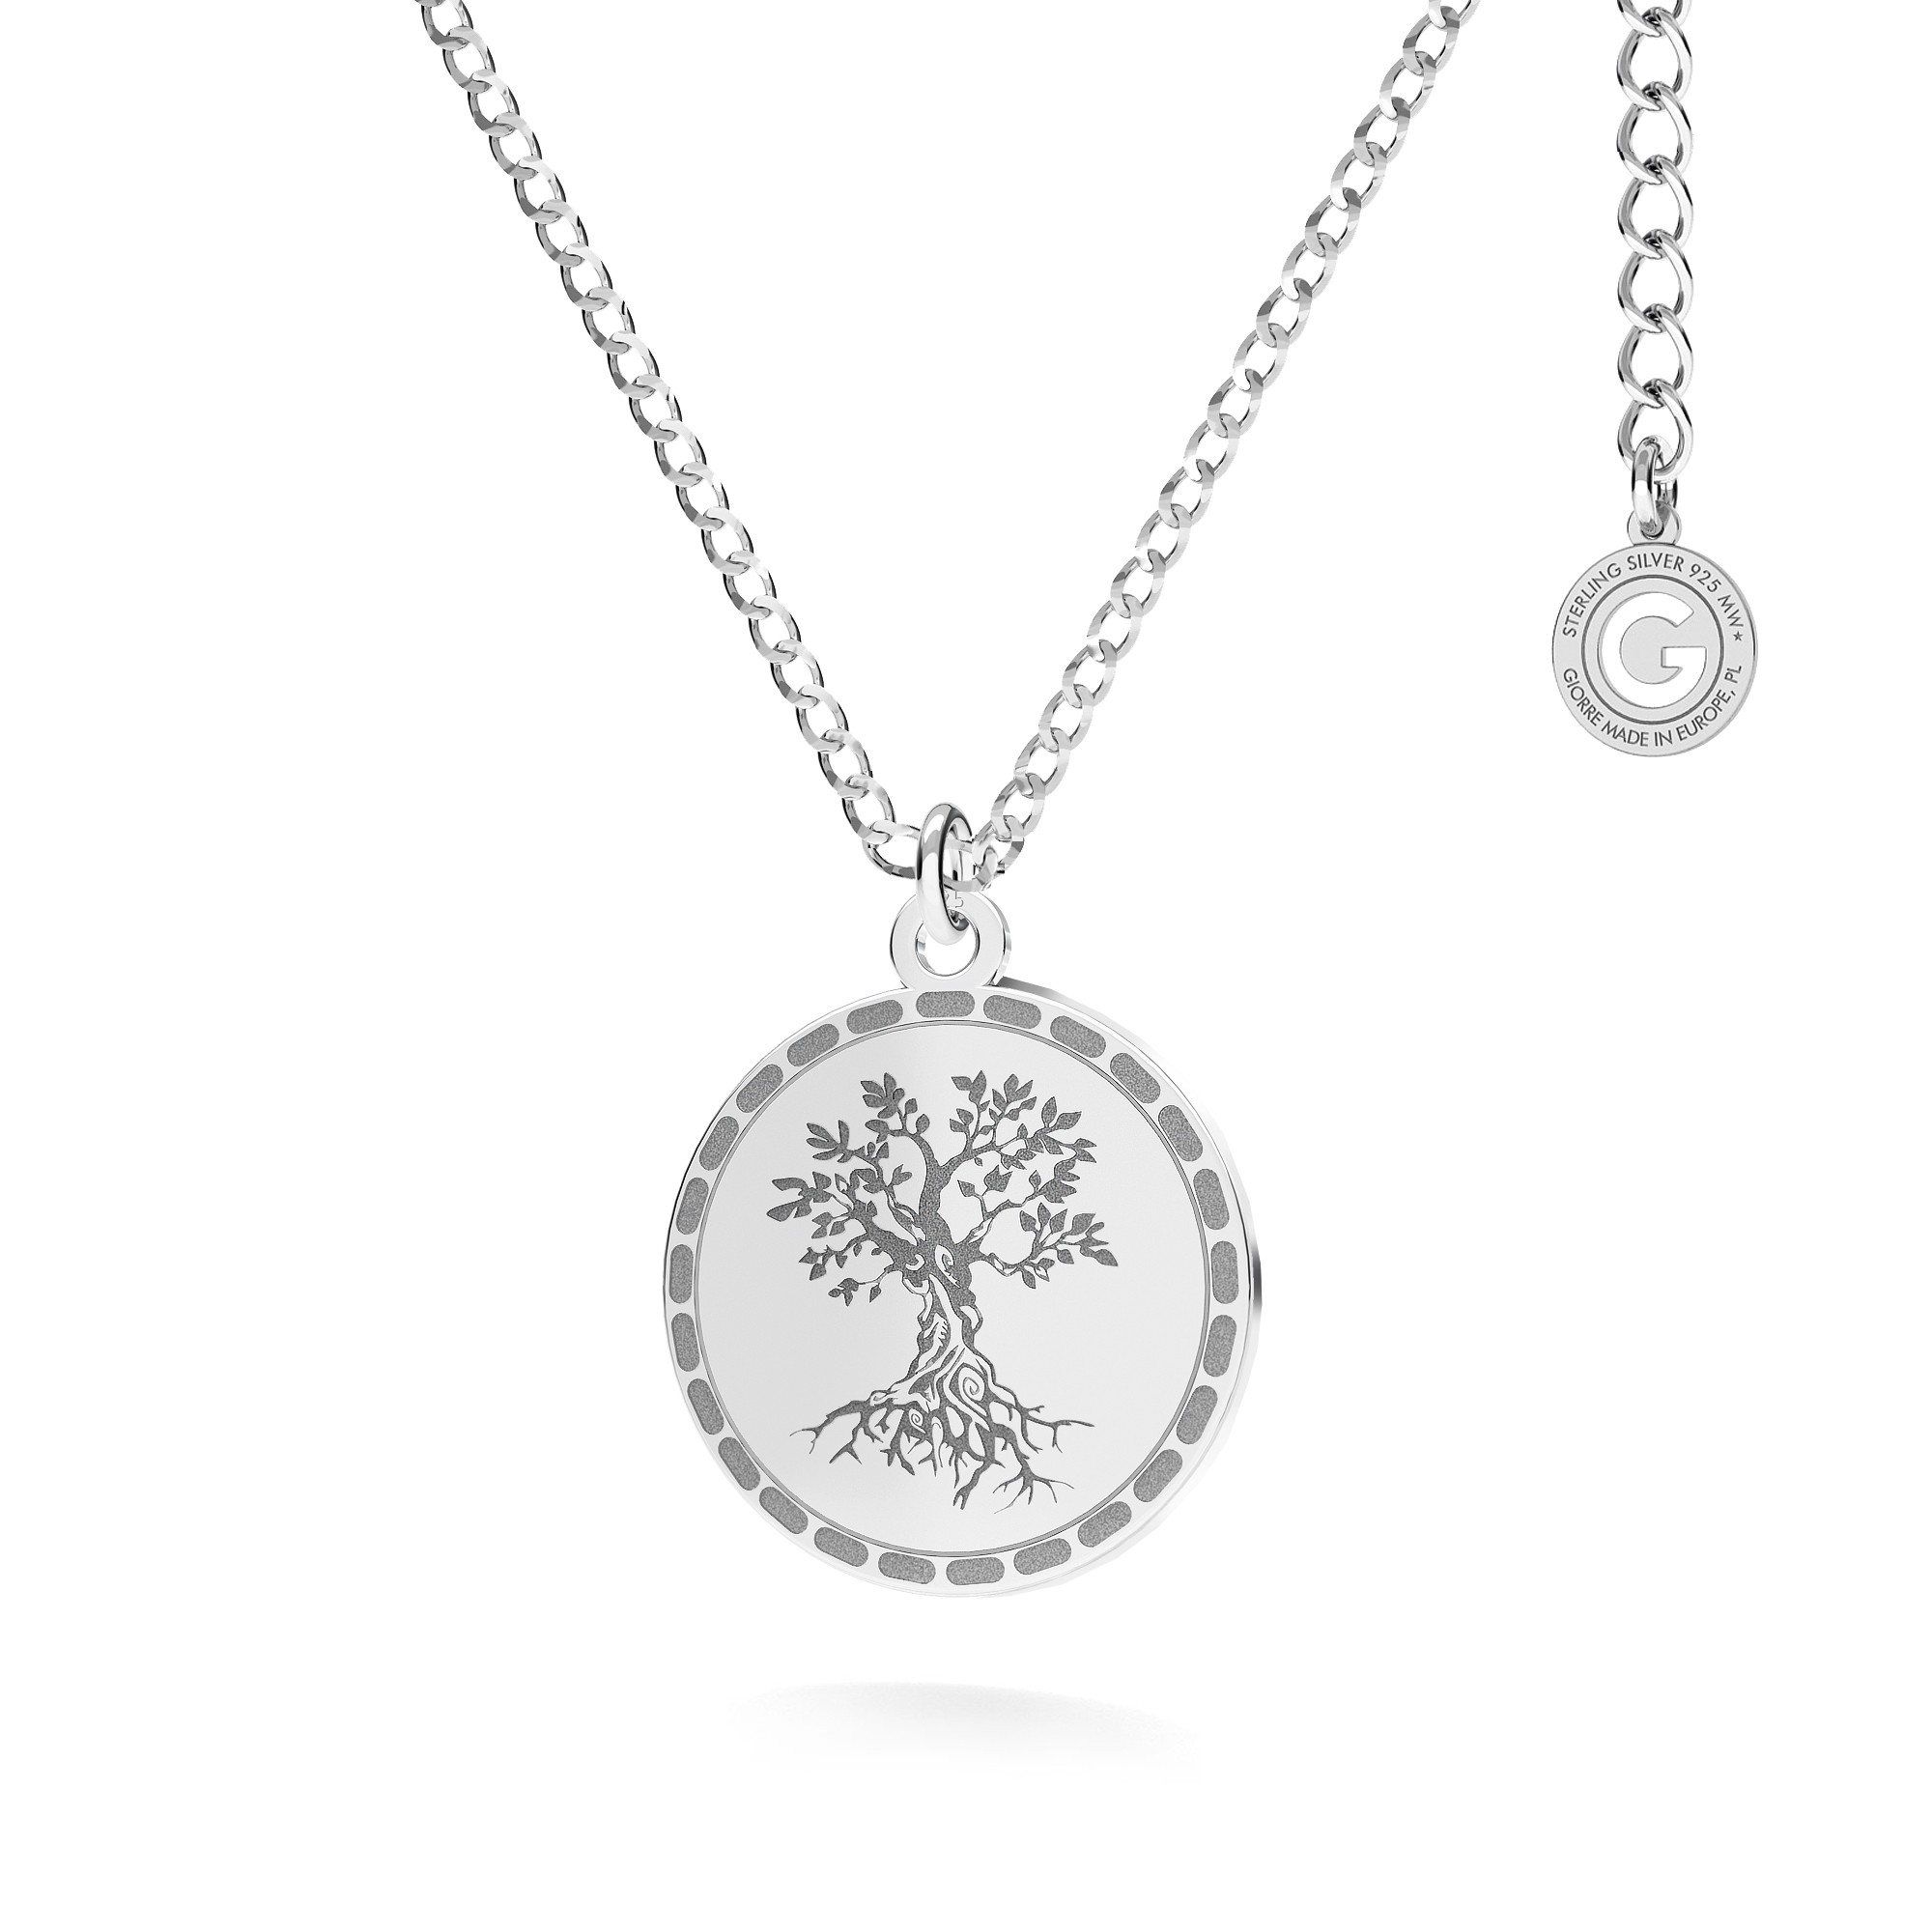 Giorre Woman's Necklace 36087